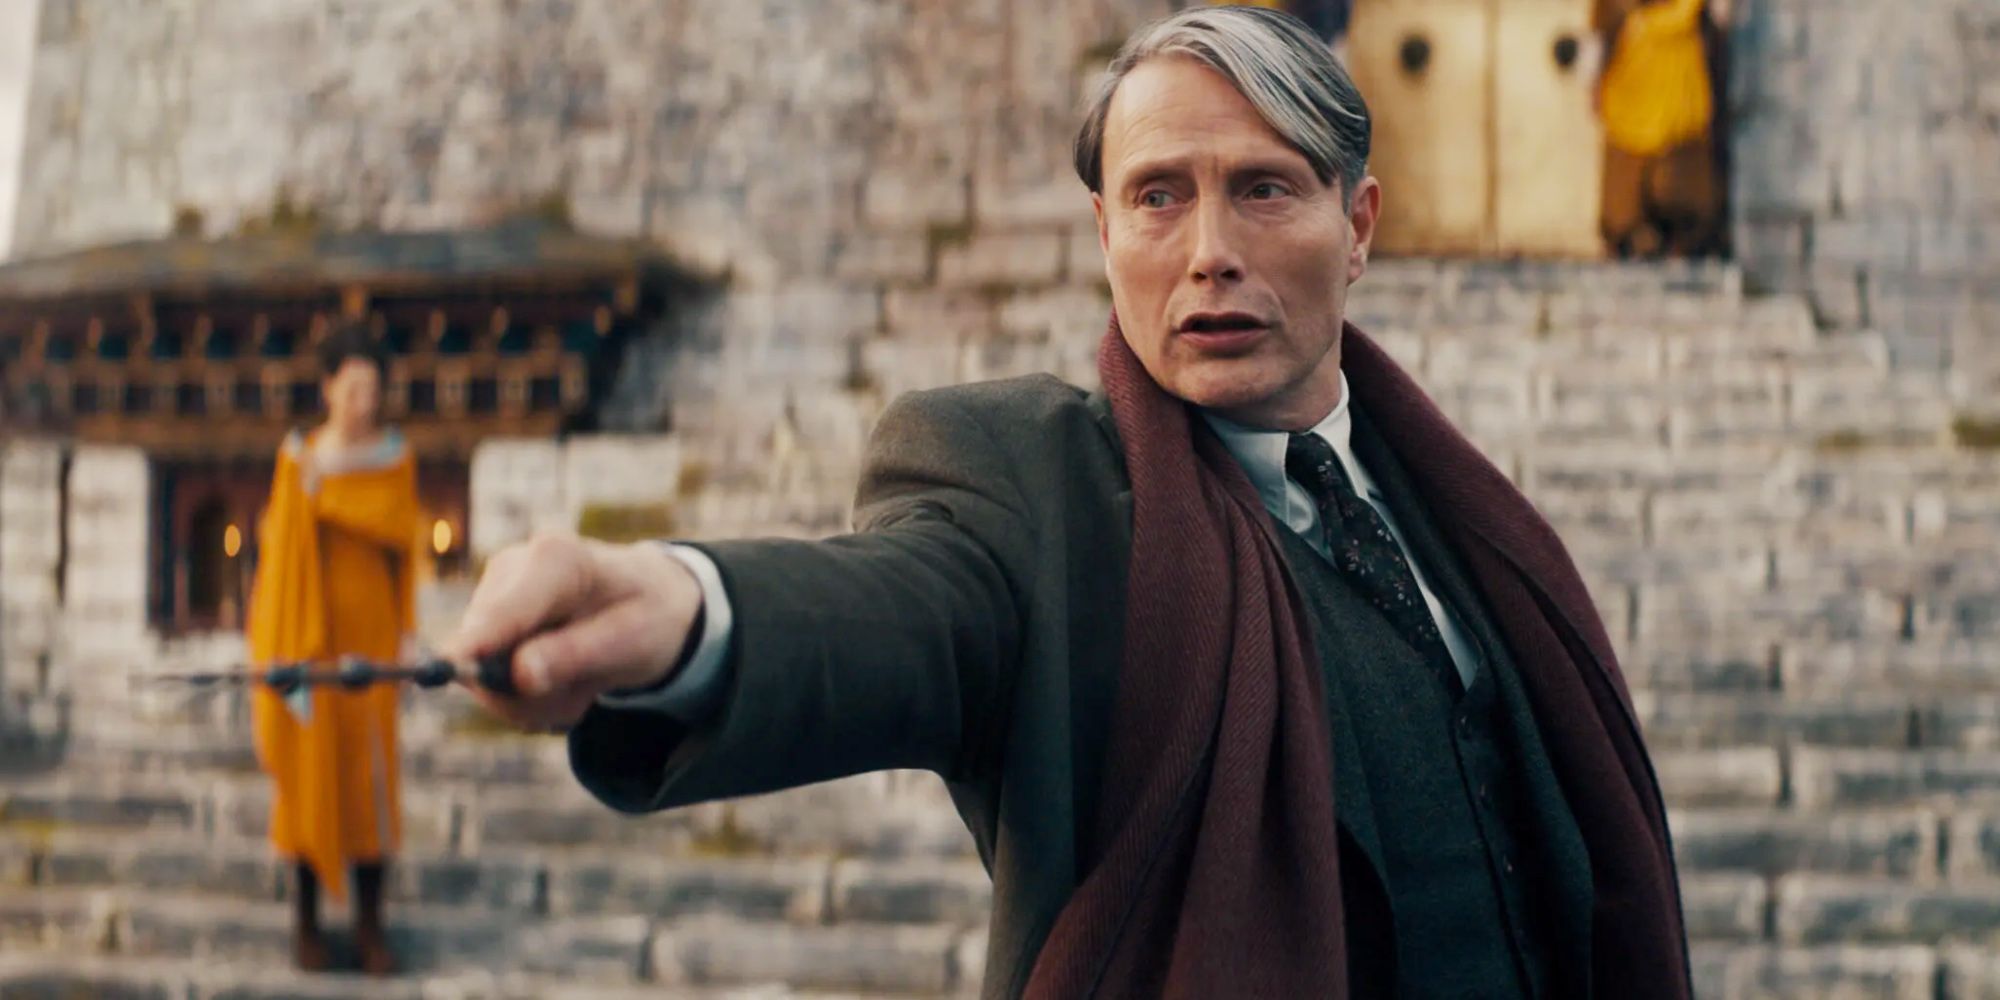 Where Does Grindelwald Go At The End Of Fantastic Beasts 3?